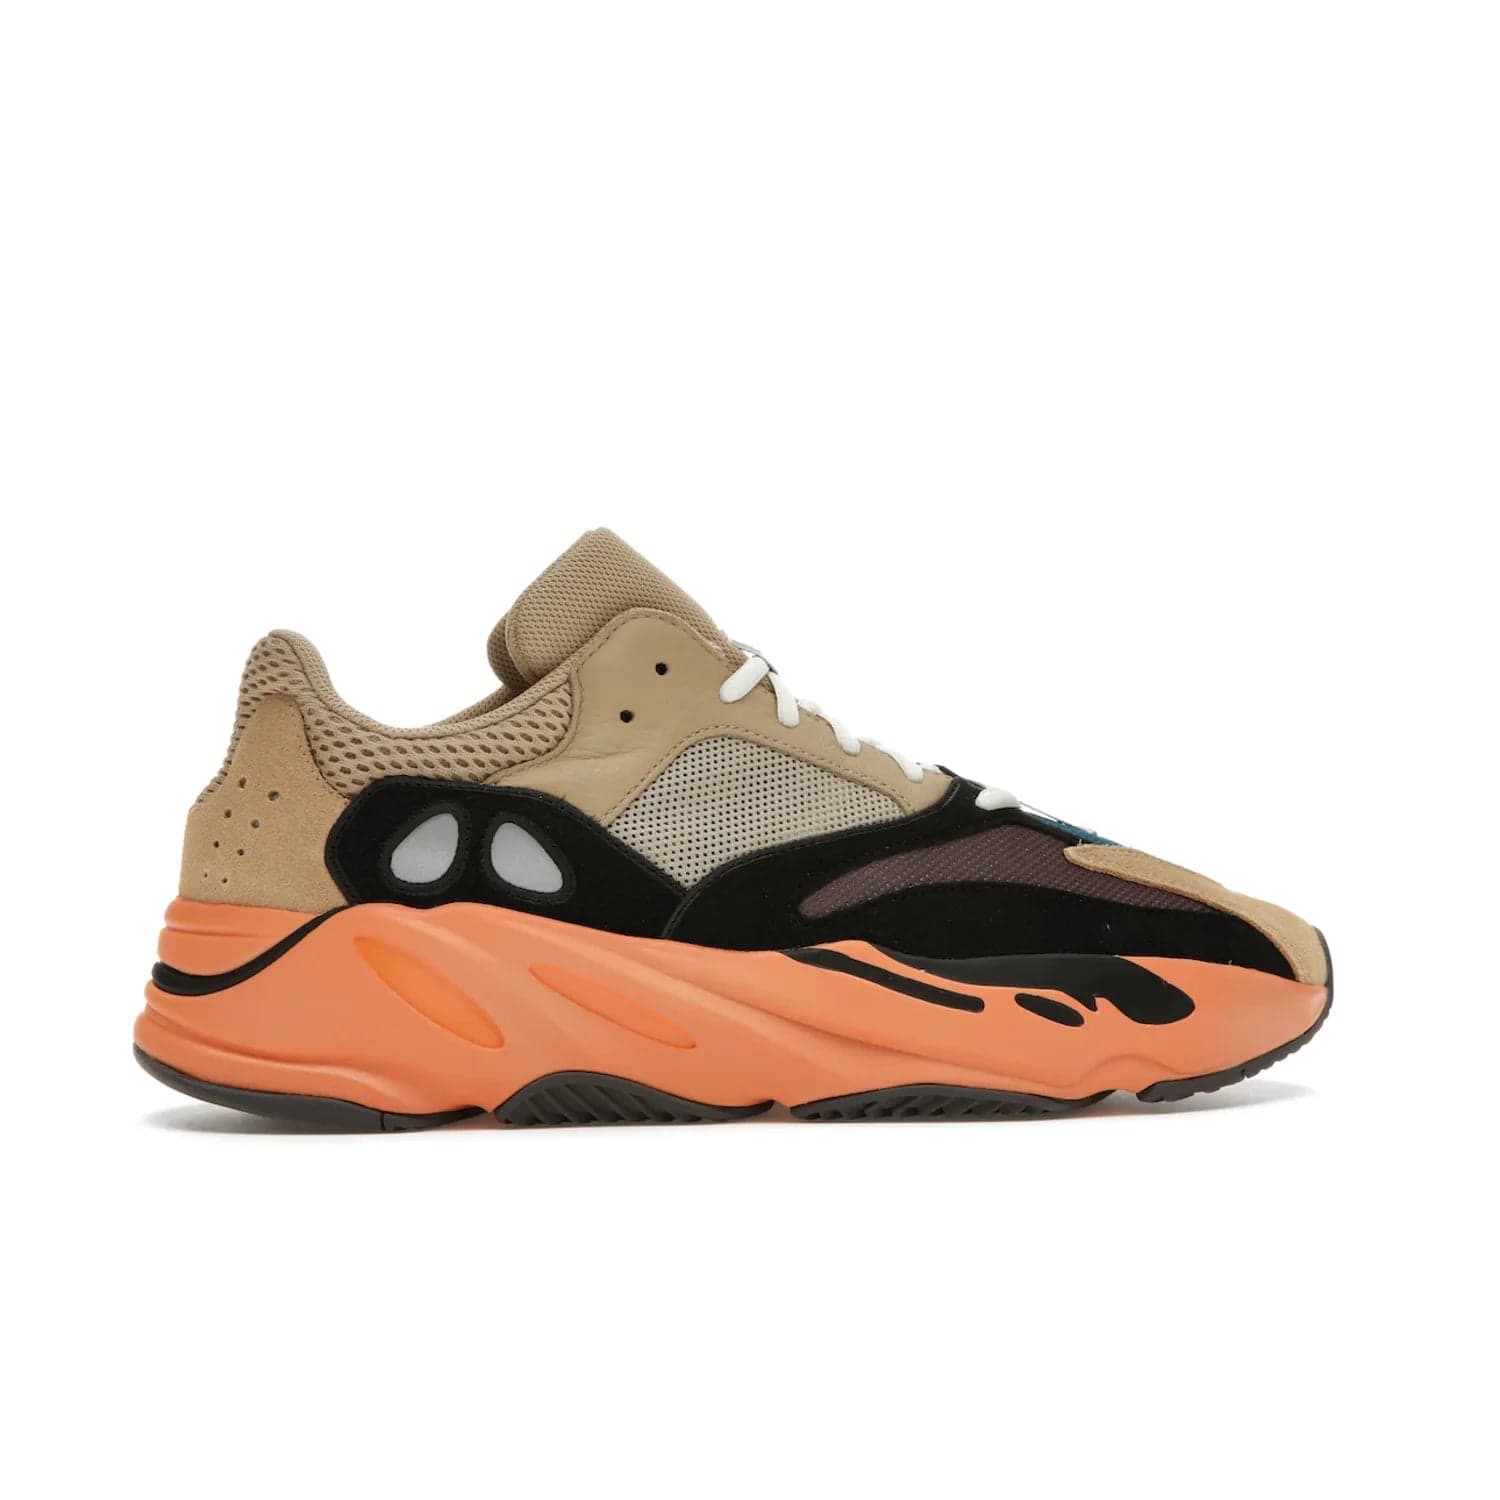 adidas Yeezy Boost 700 Enflame Amber - Image 36 - Only at www.BallersClubKickz.com - Adidas Yeezy Boost 700 Enflame Amber: Eye-catching design with pale yellow, brown, teal, and orange! Get yours in June 2021.